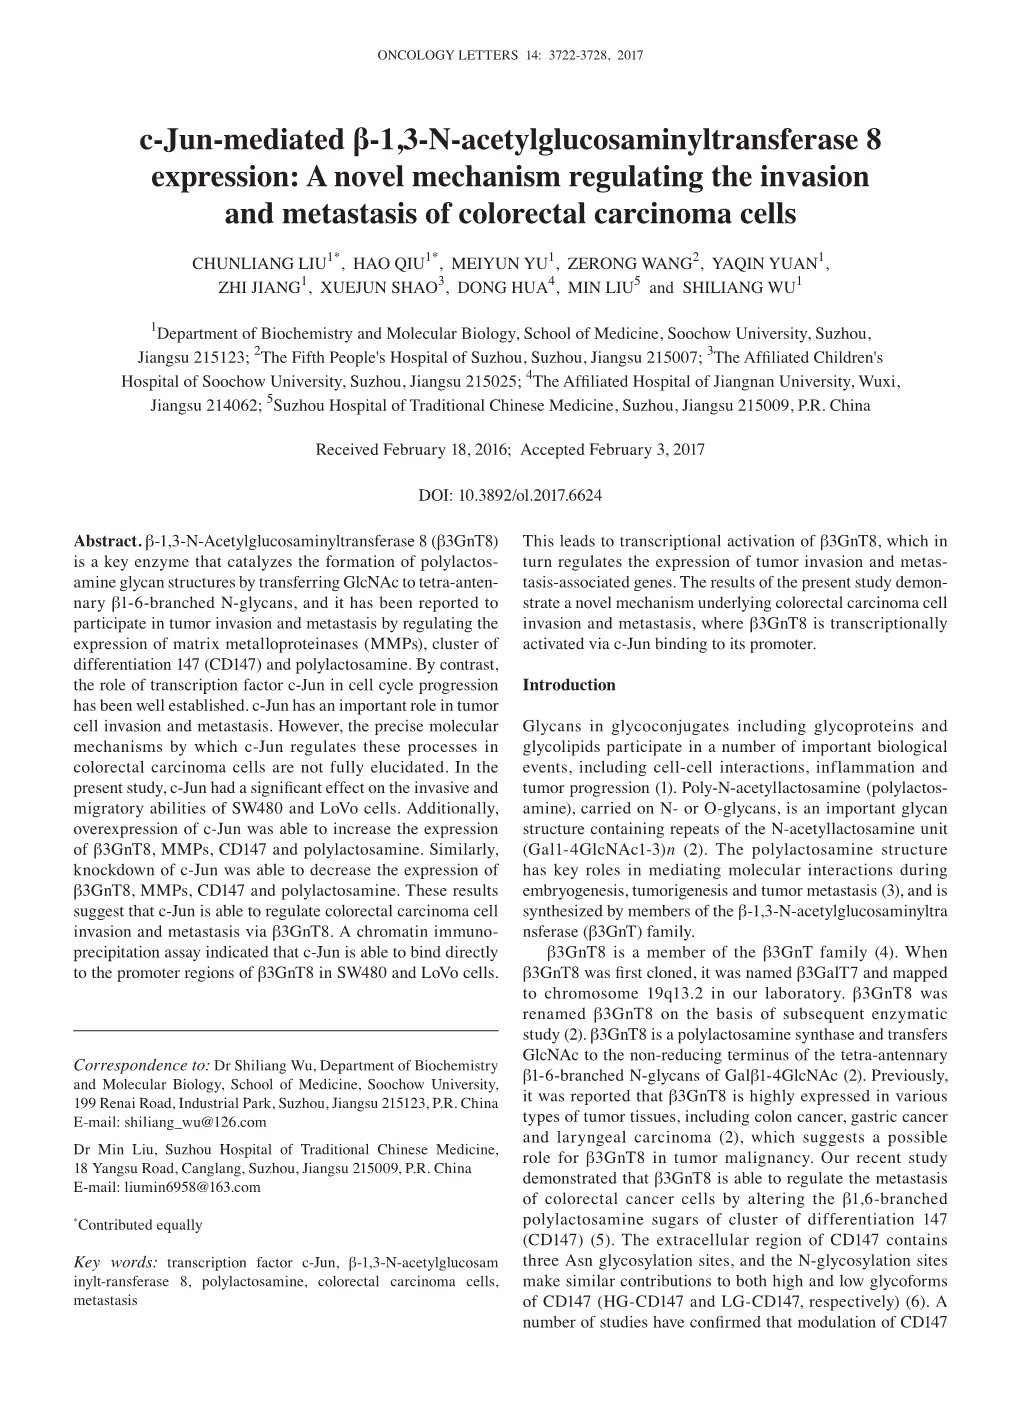 C‑Jun‑Mediated Β‑1,3‑N‑Acetylglucosaminyltransferase 8 Expression: a Novel Mechanism Regulating the Invasion and Metastasis of Colorectal Carcinoma Cells